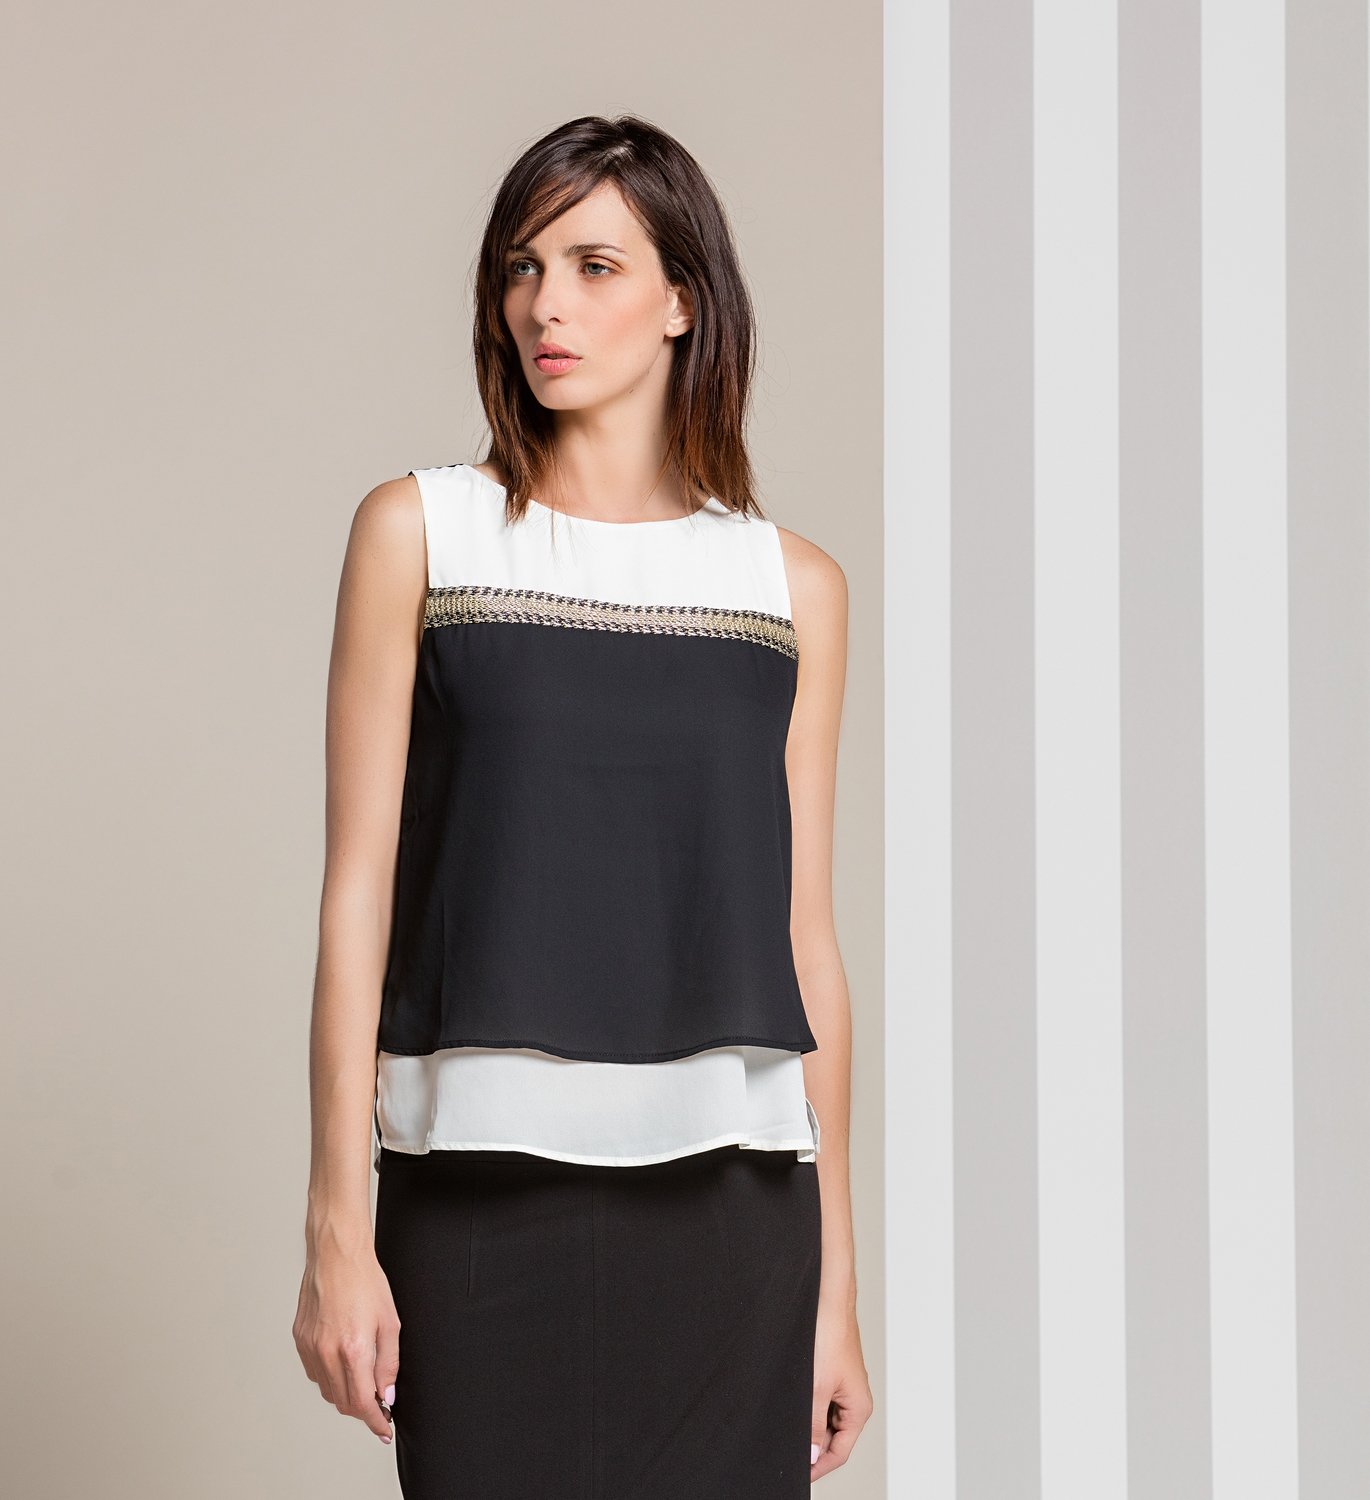 Paul Brial: Waves Colorblock Bling Tunic SOLD OUT